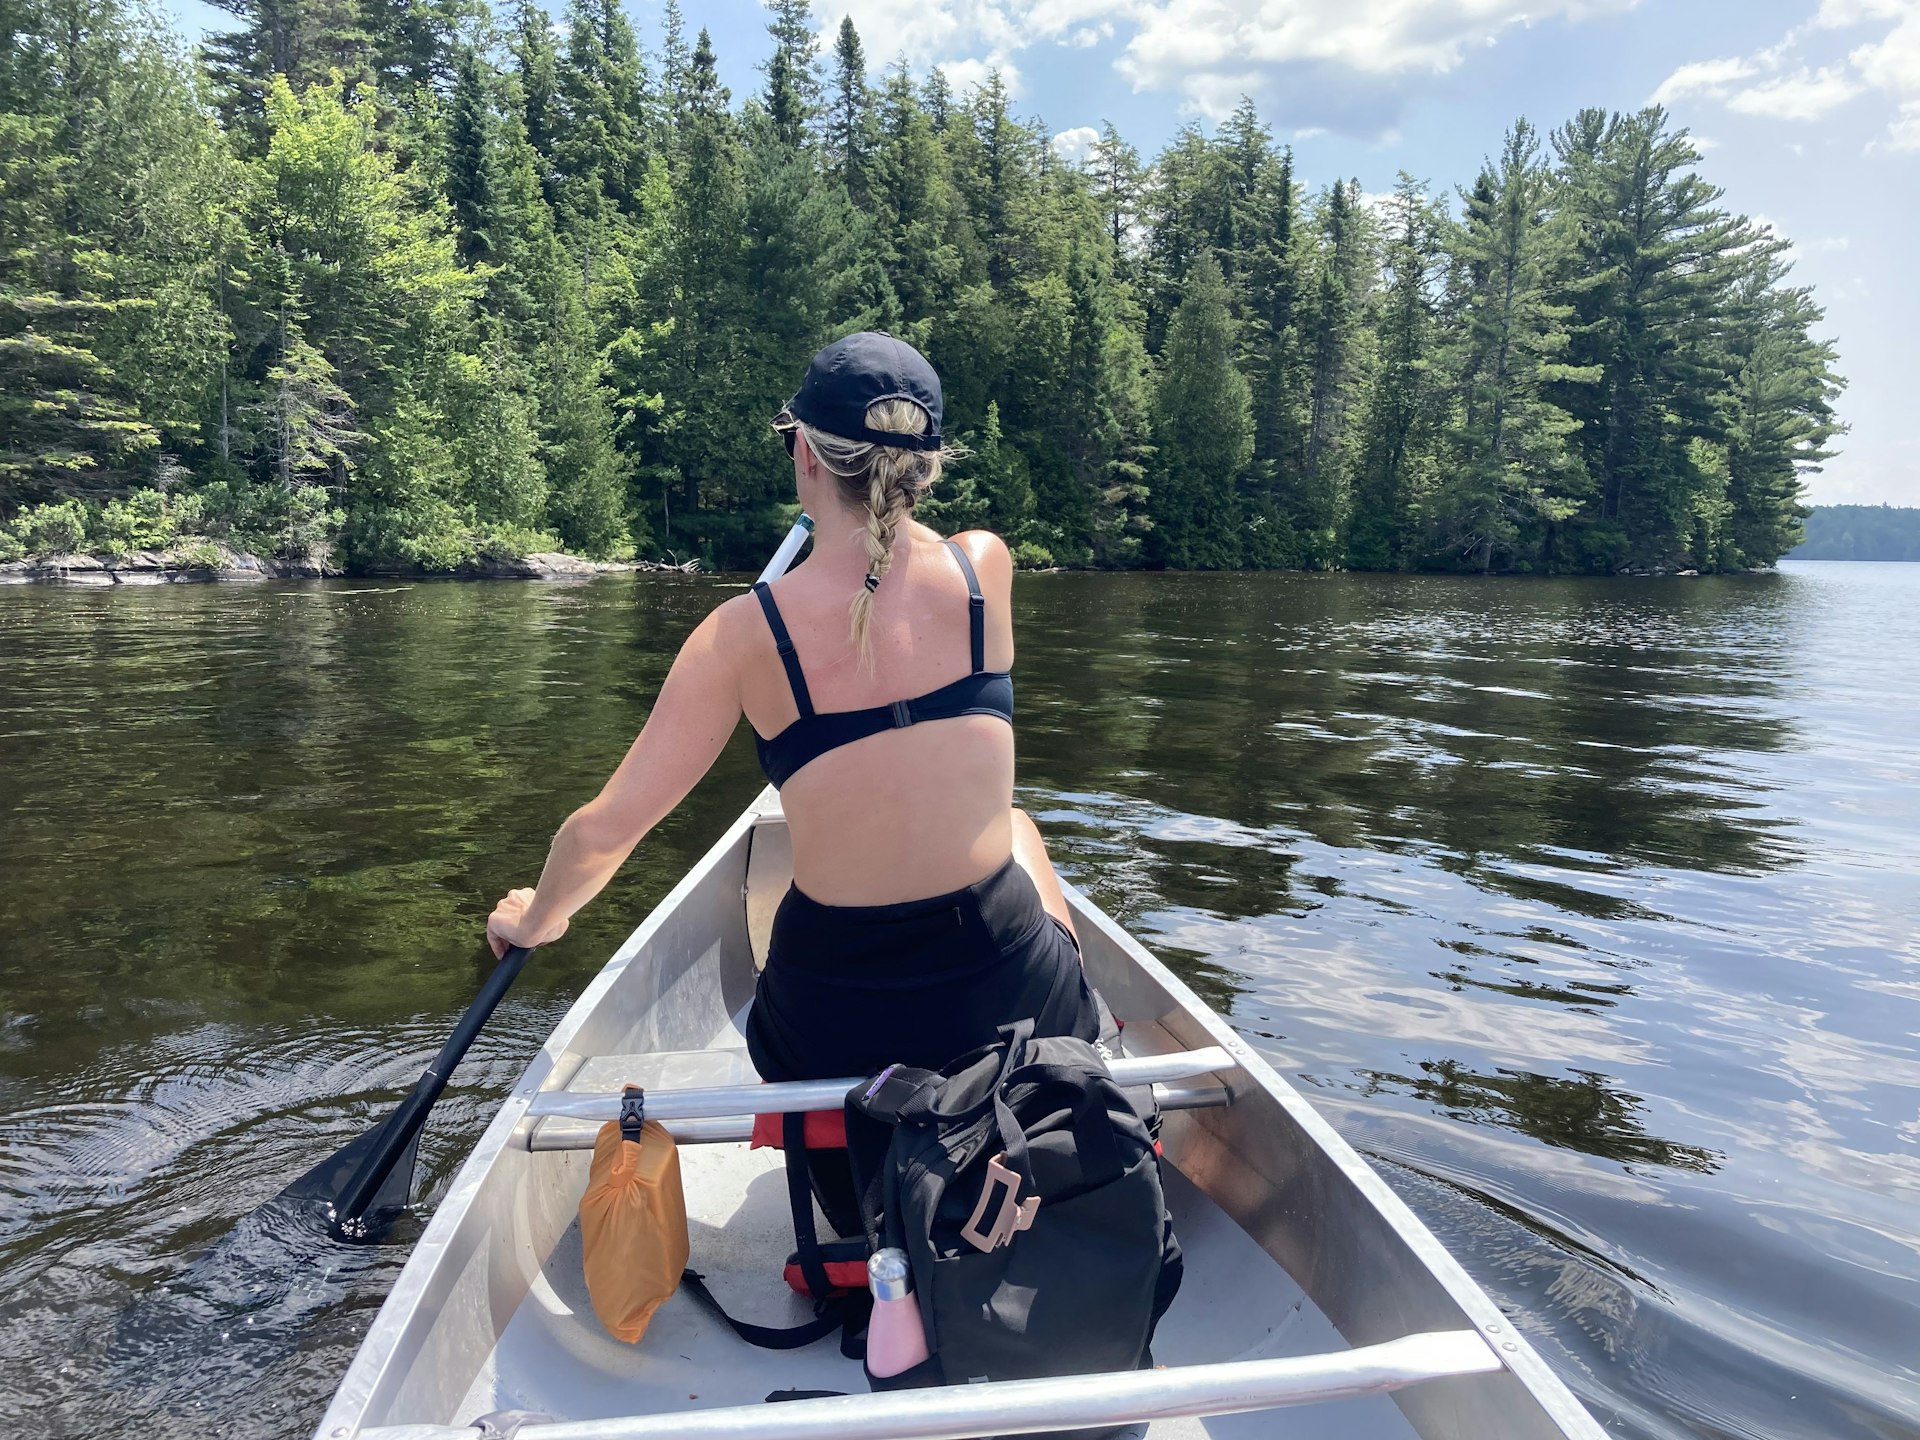  Lonely Planet writer Isabella Noble canoes across a lake in Algonquin Provincial Park, Canada and we see her from behind